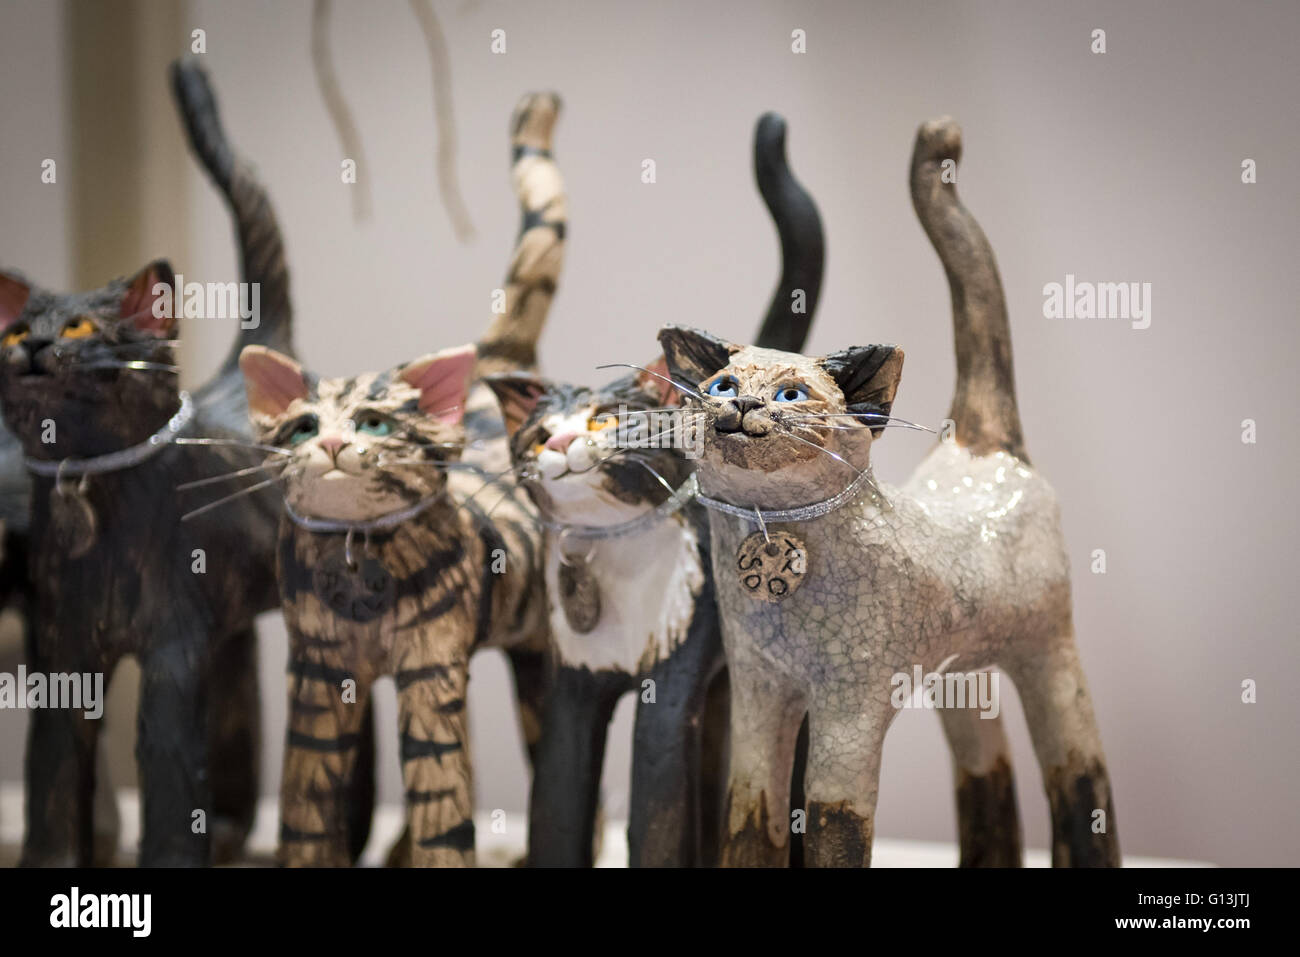 Handmade clay cat figures figurines at The National Pet Show at the Excel Centre 7th May 2016 in London, UK. Stock Photo